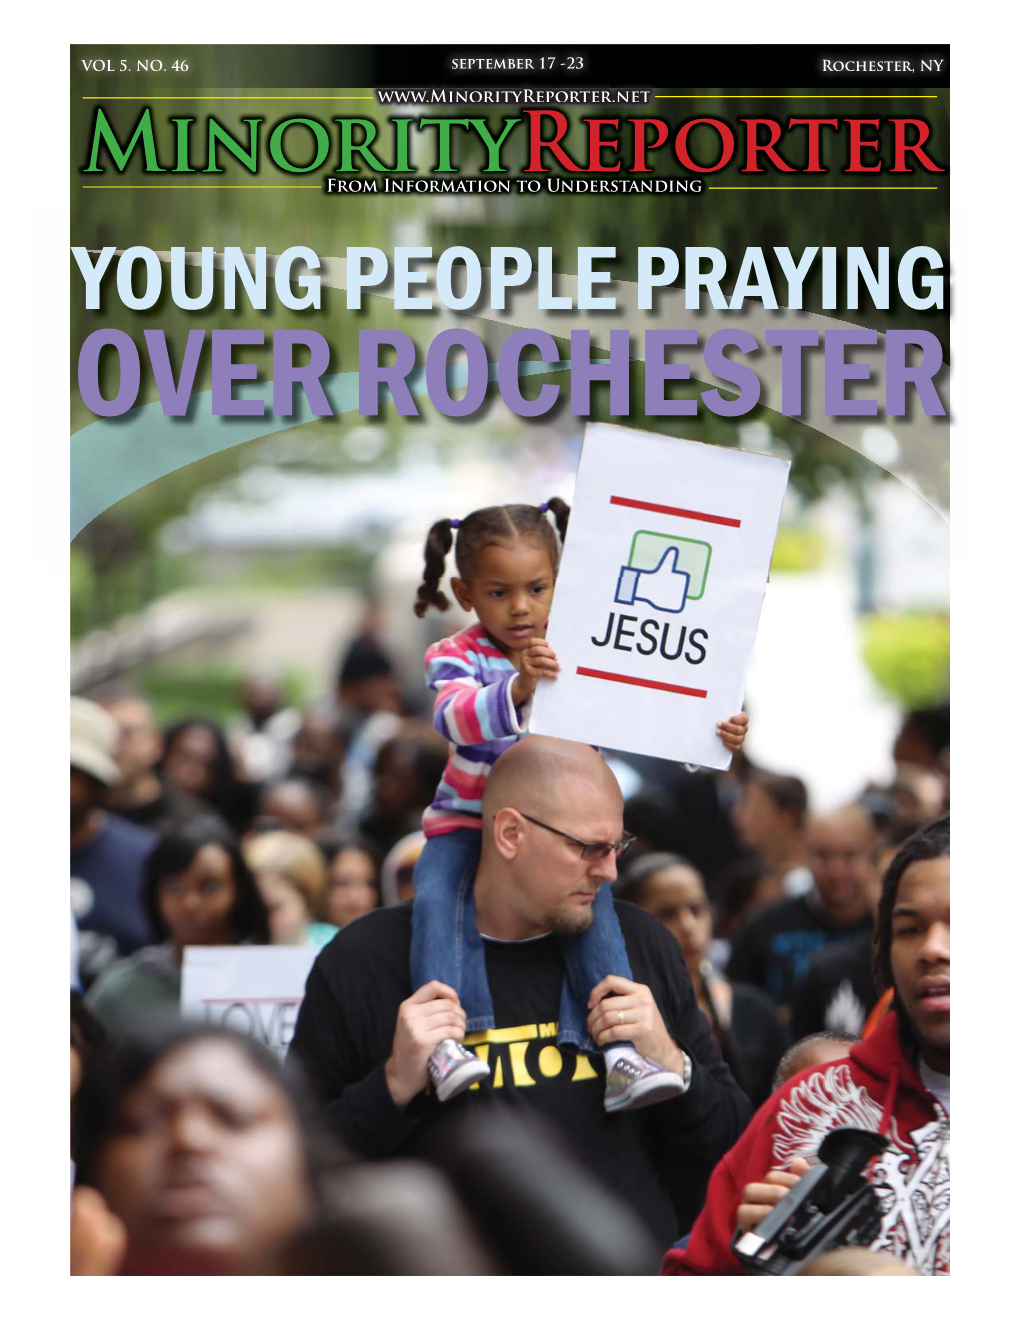 YOUNG PEOPLE PRAYING OVER ROCHESTER 2 :: - WEEK of SEPTEMBER 17 - 23, 2012 in This Issue: Minority